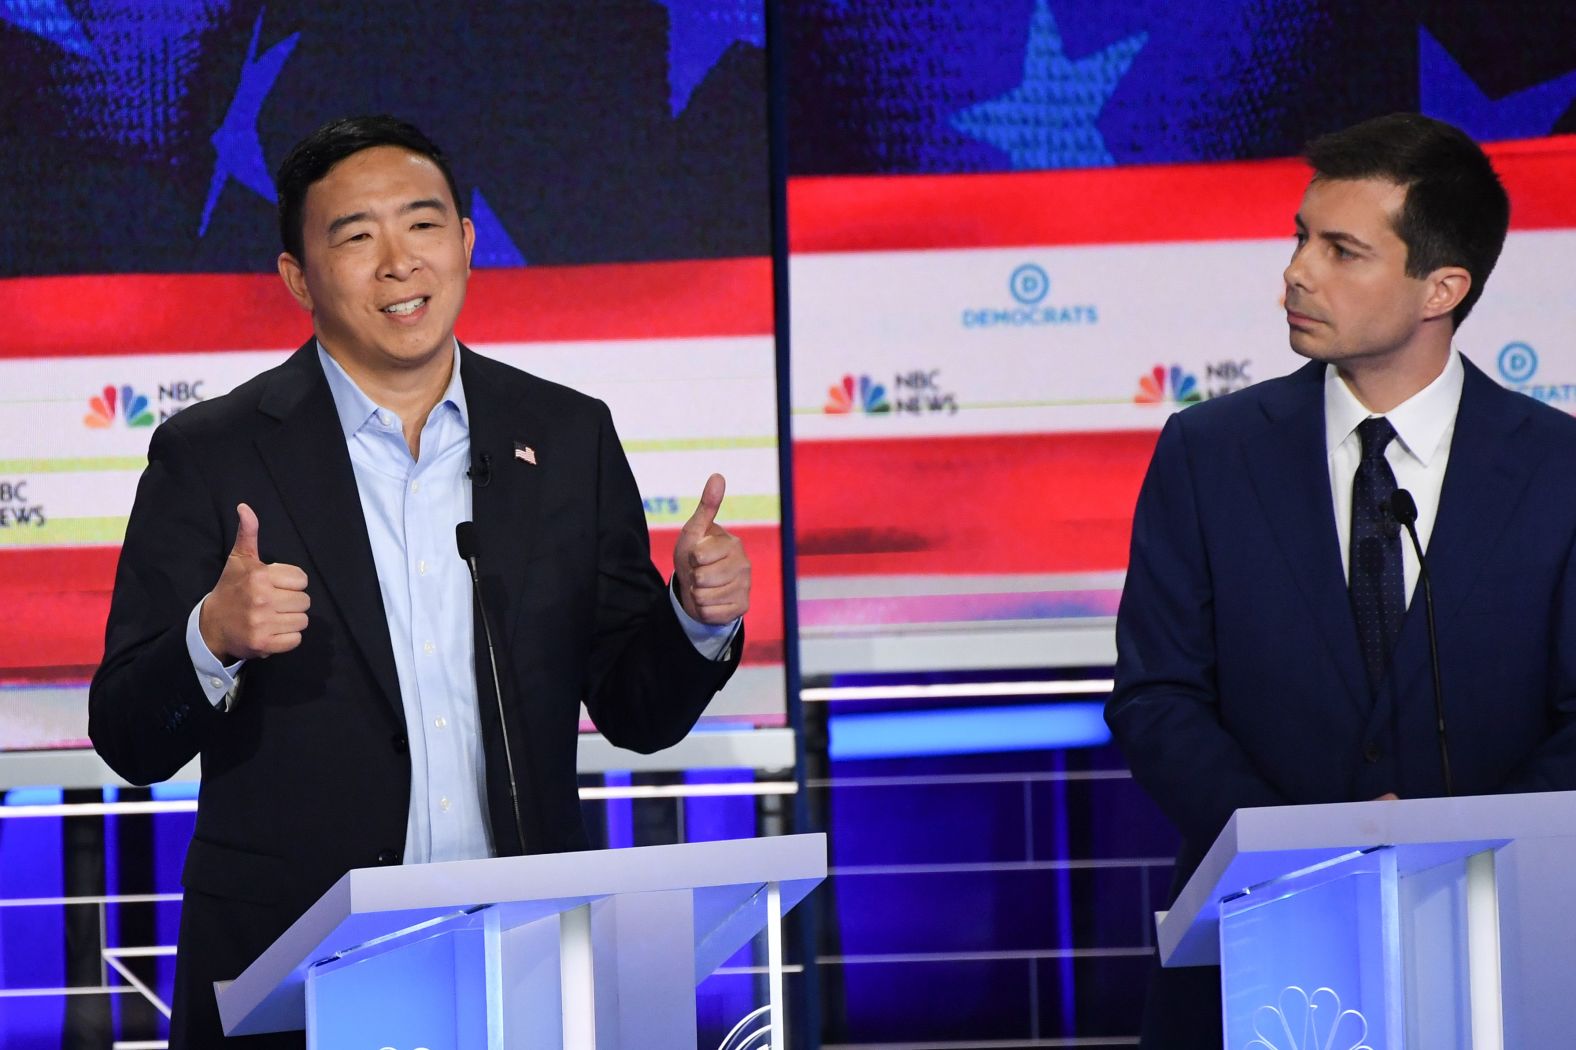 Yang answers a question while Buttigieg looks on. <a href="index.php?page=&url=https%3A%2F%2Fwww.cnn.com%2Fpolitics%2Flive-news%2Fdemocratic-debate-june-27-2019%2Fh_cc7dd7dbb0234b00abcea7f0d23e956a" target="_blank">Yang's platform</a> includes a plan for universal basic income. He wants to give all Americans over the age of 18 $1,000 per month to address economic inequality. He argues the policy would play a key role in restructuring the modern economy to make it more equitable.